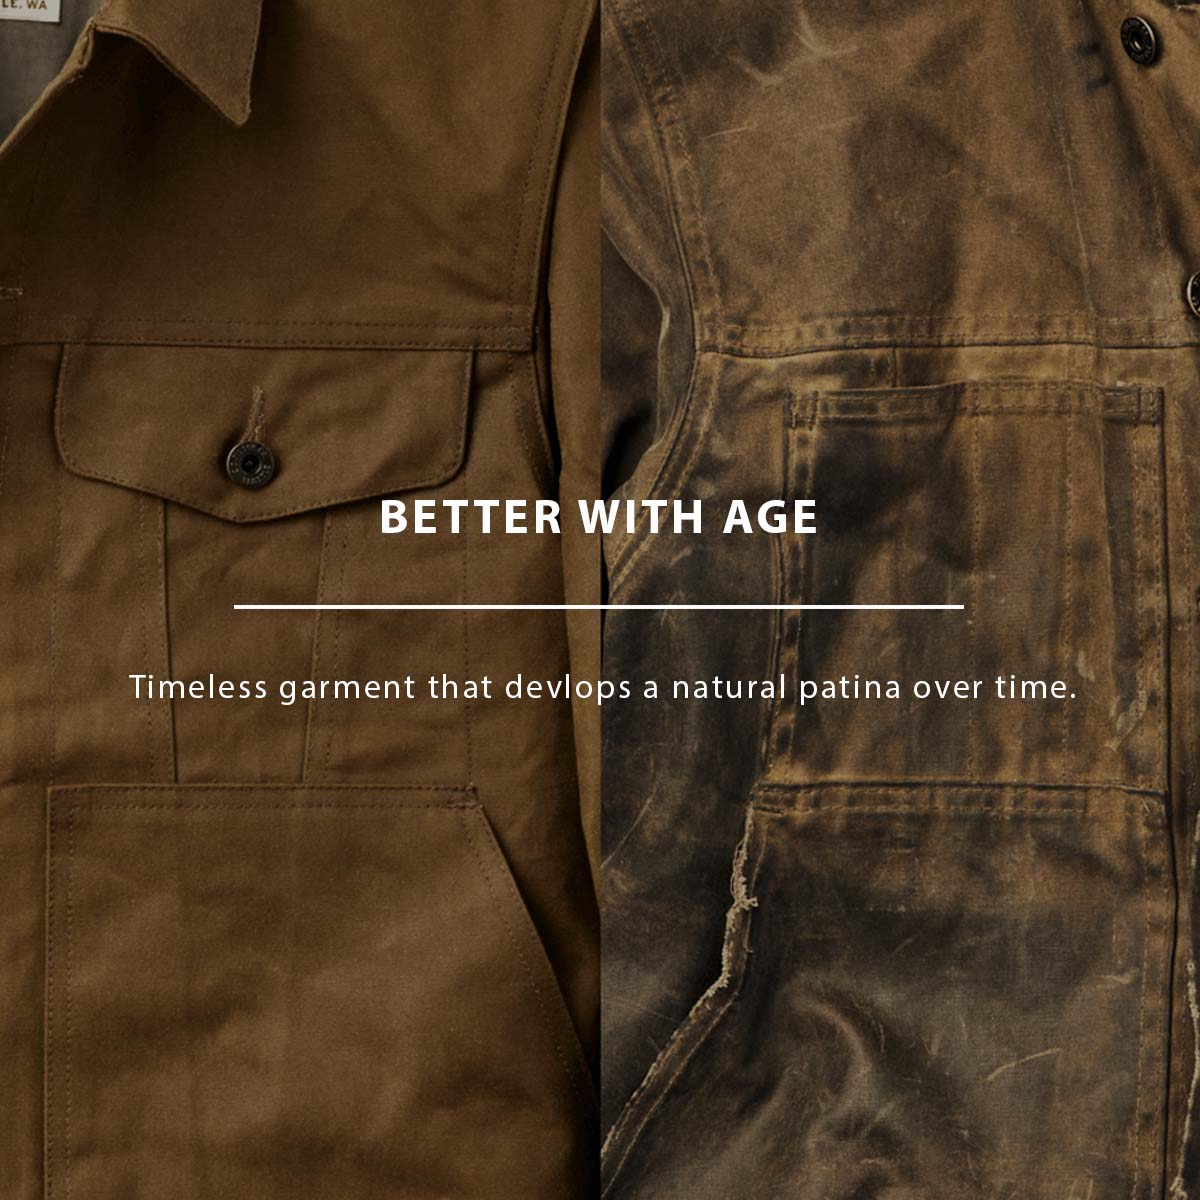 Filson Tin Cloth Insulated Packer Coat, better with age.